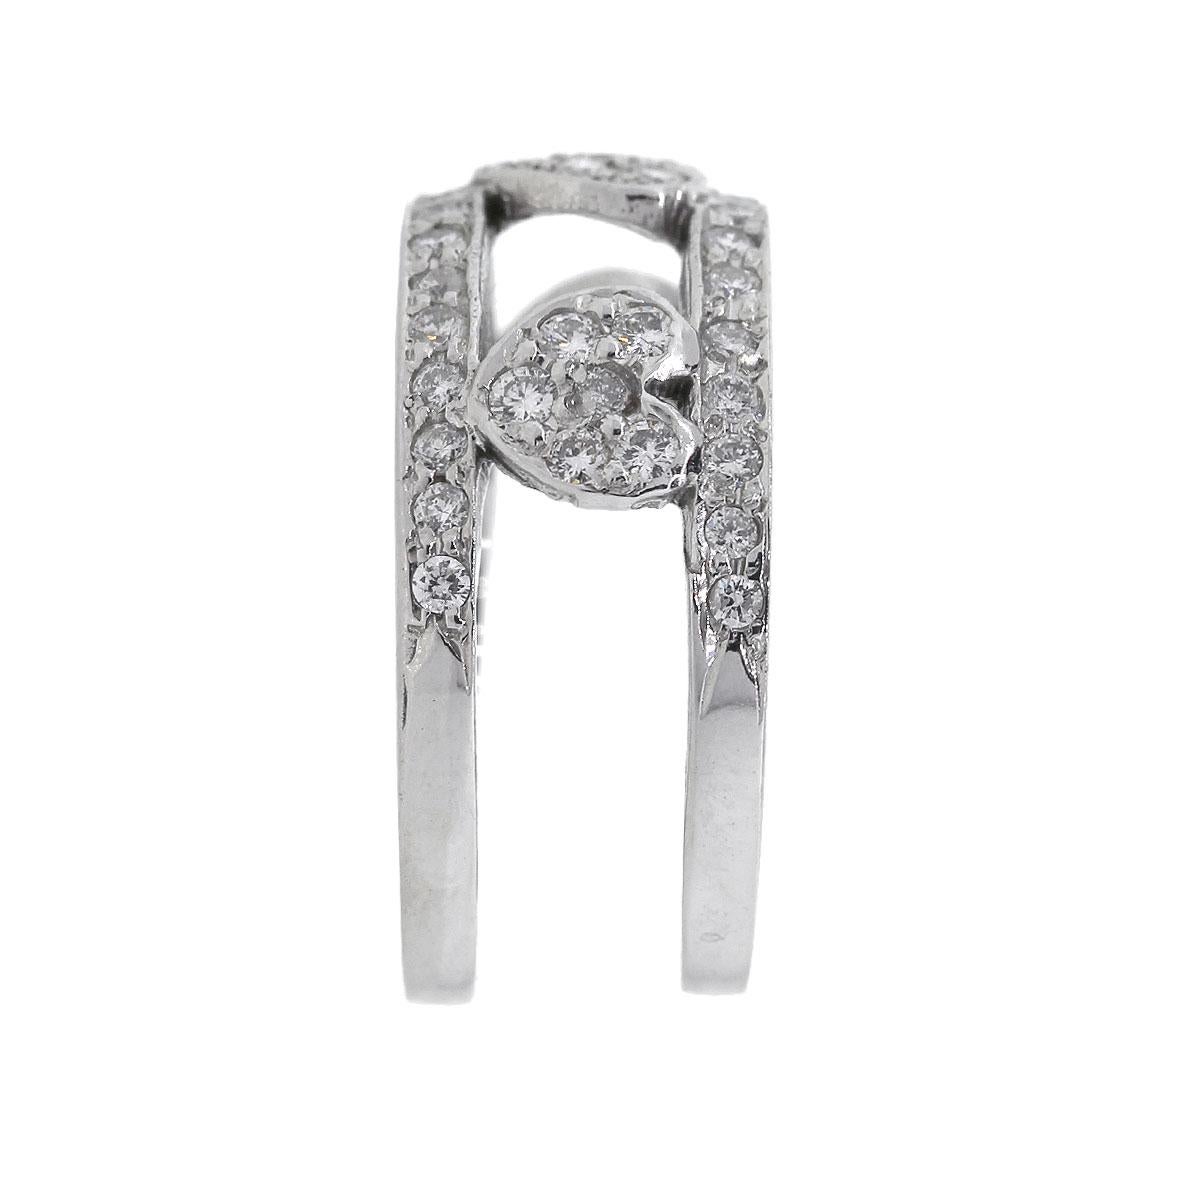 Material: 18k Yellow Gold
Diamond Details: Approximately 0.55ctw of round diamonds. Diamonds are G/H in color and VS in clarity
Ring Measurements: 0.82″ x 0.82″ x 0.37″
Item Weight: 7.4g (4.7dwt)
Ring Size: 5.25
SKU: A30312350